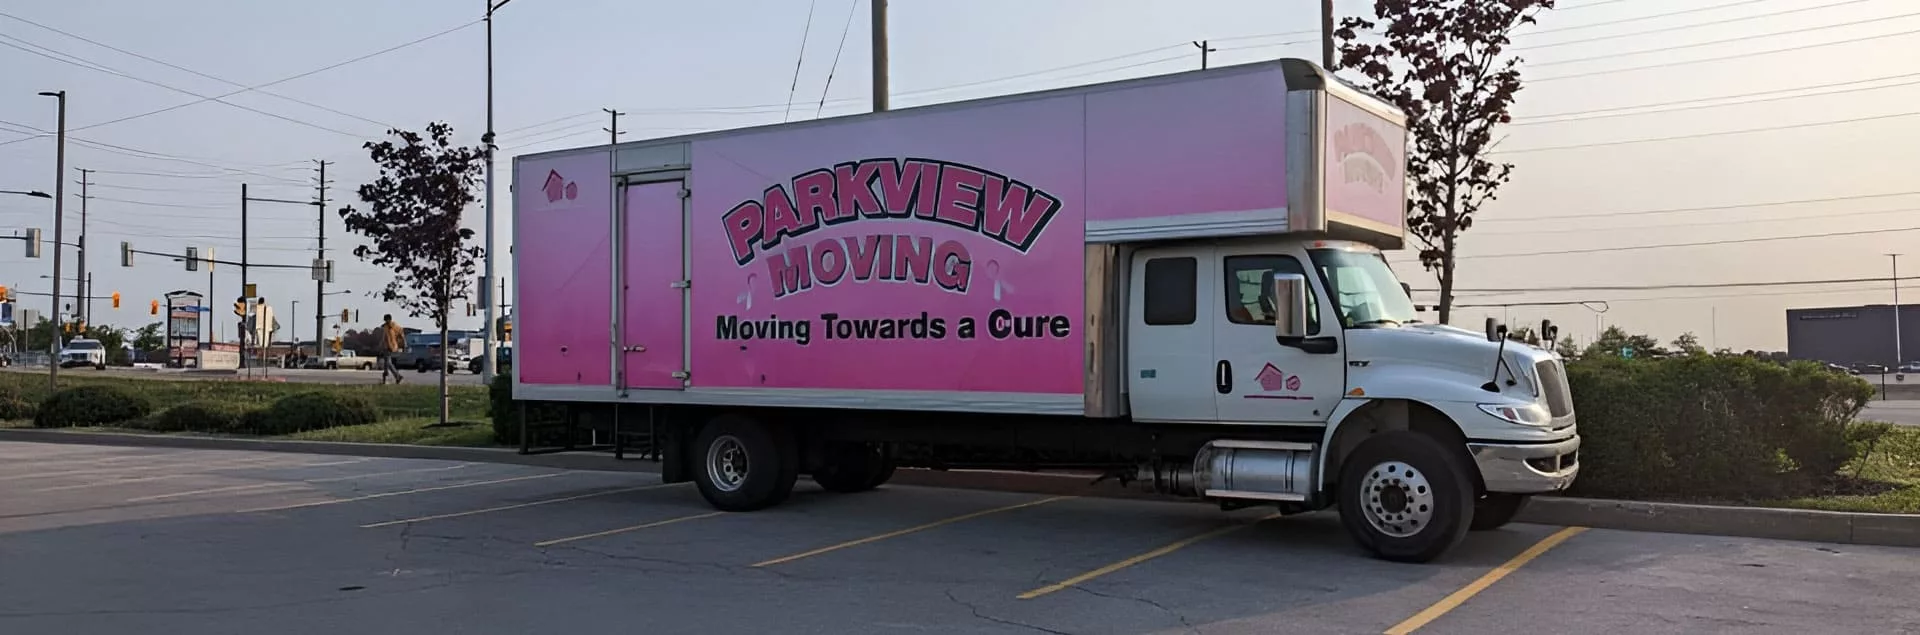 Parkview Moving truck promoting a cure for cancer.